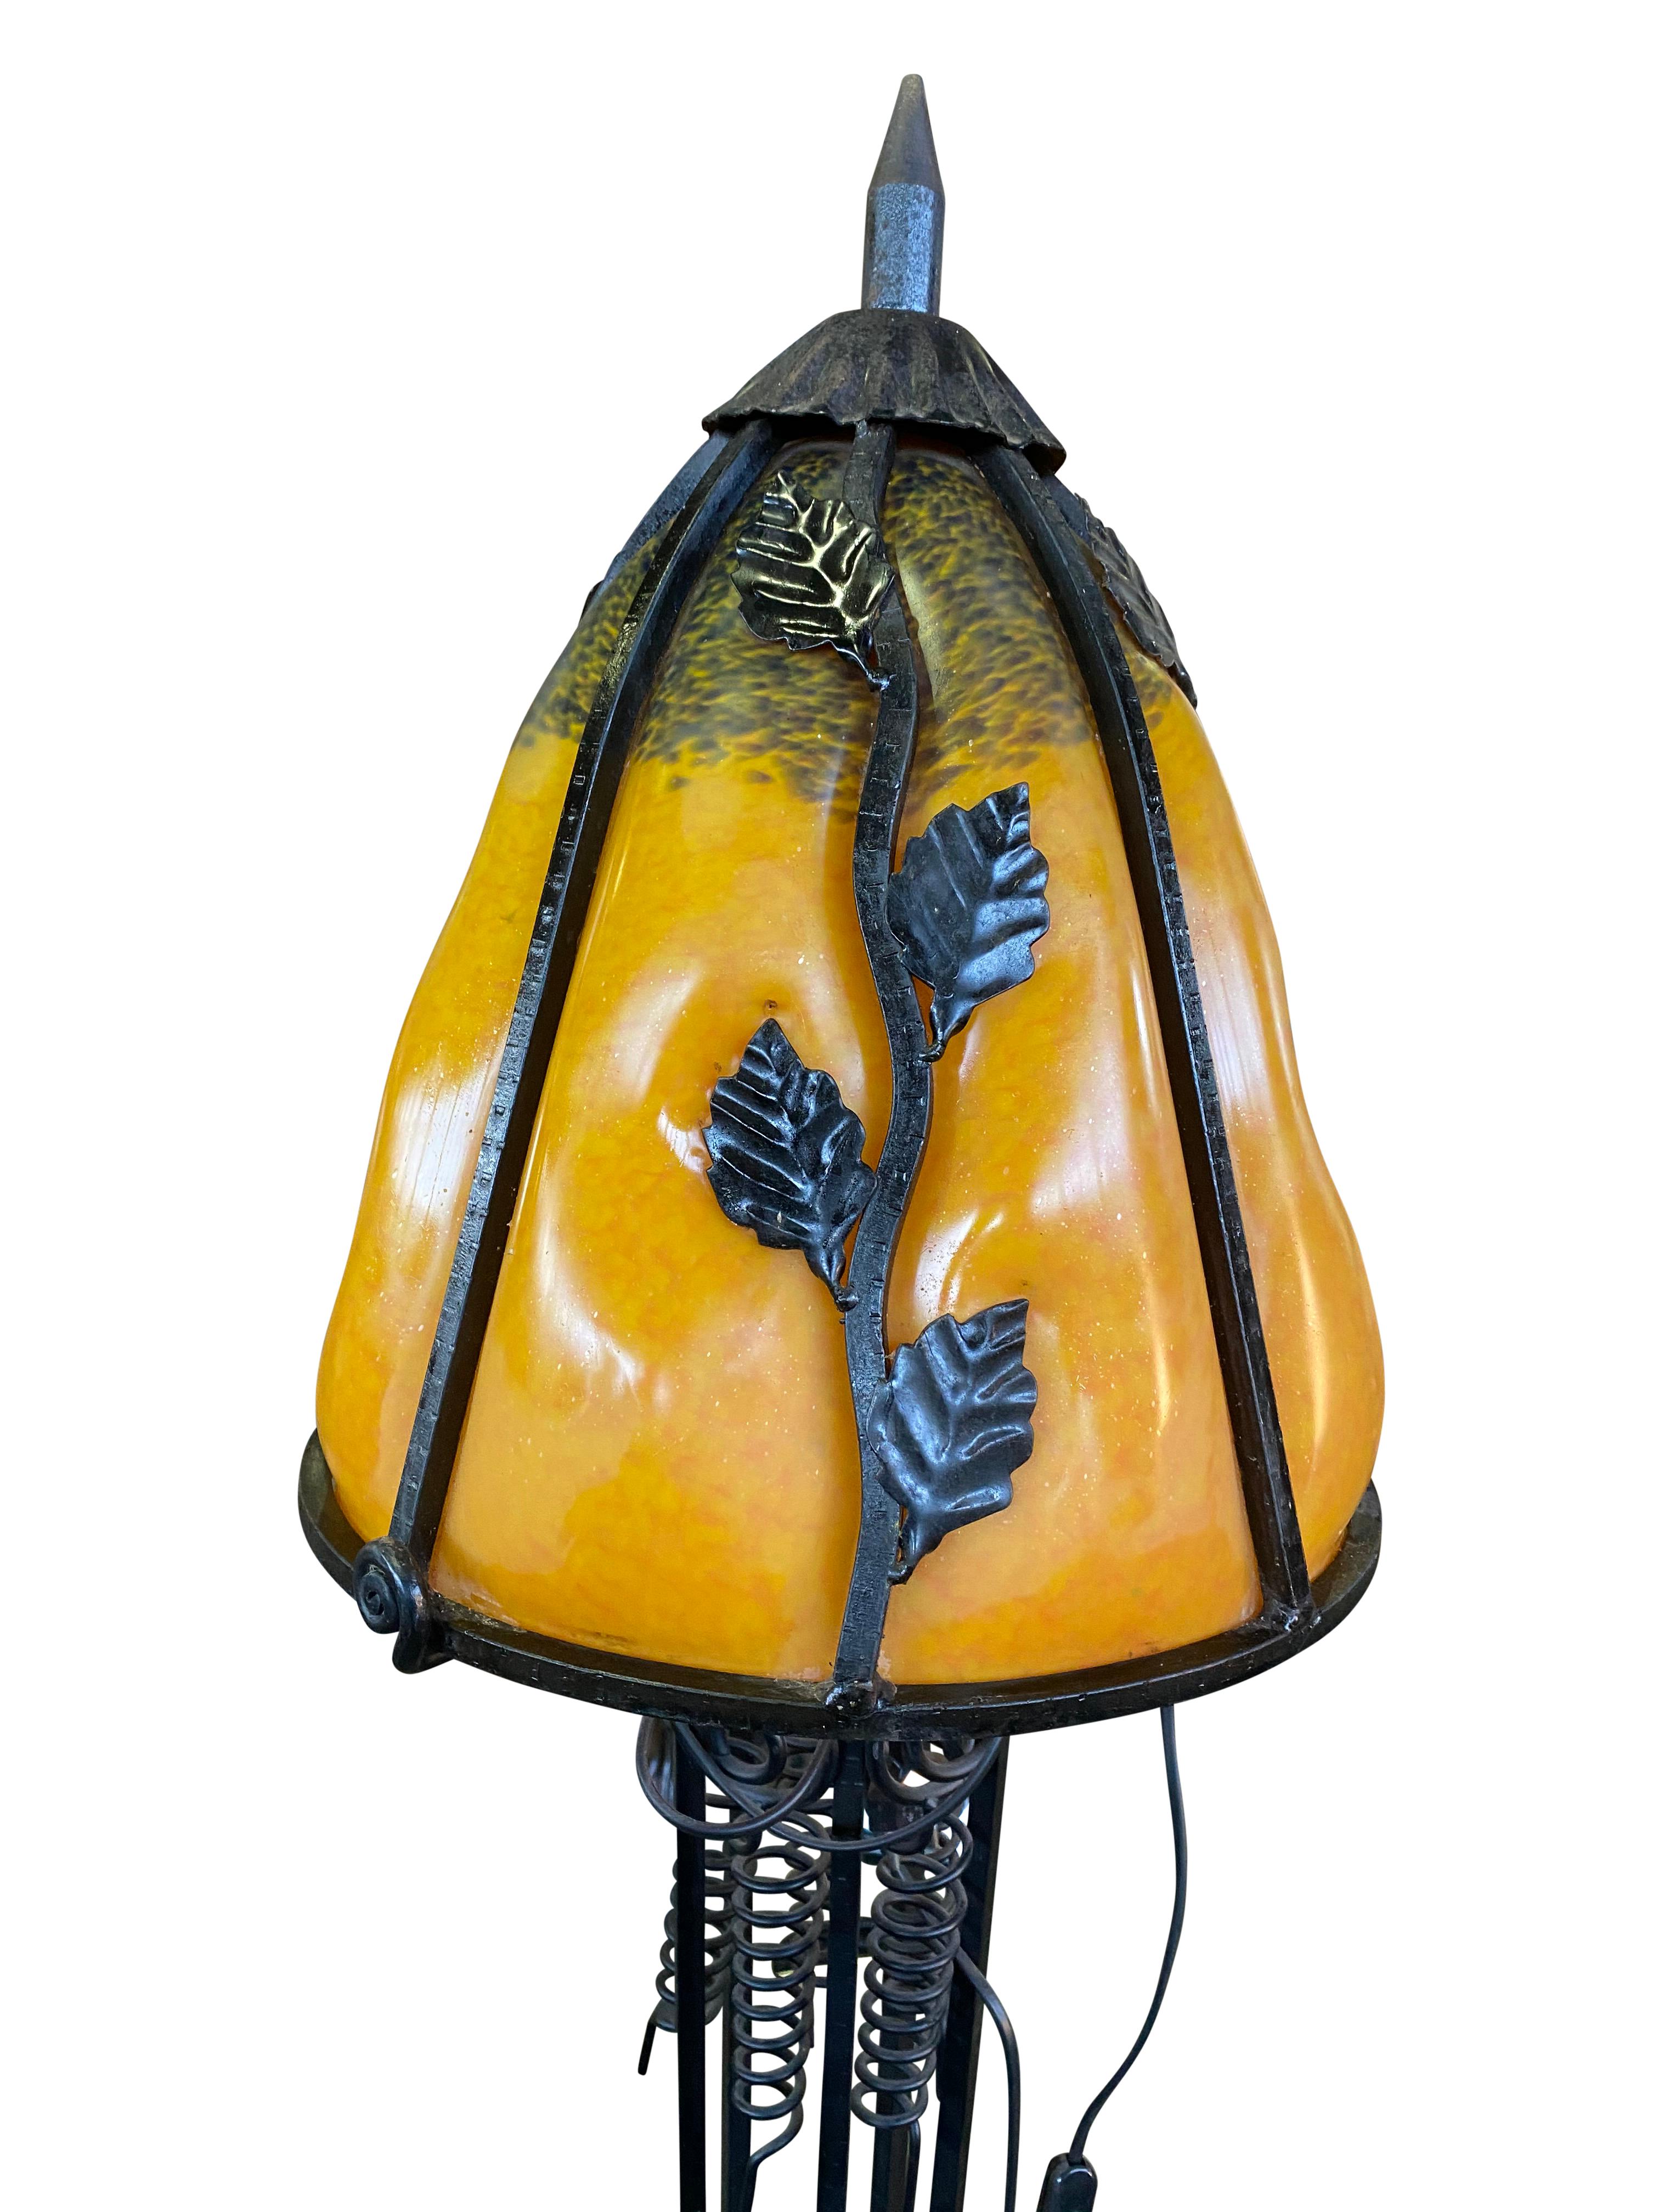 French Art Nouveau Style Lamp in Wrought Iron with Colored Glass Shades (Art nouveau)